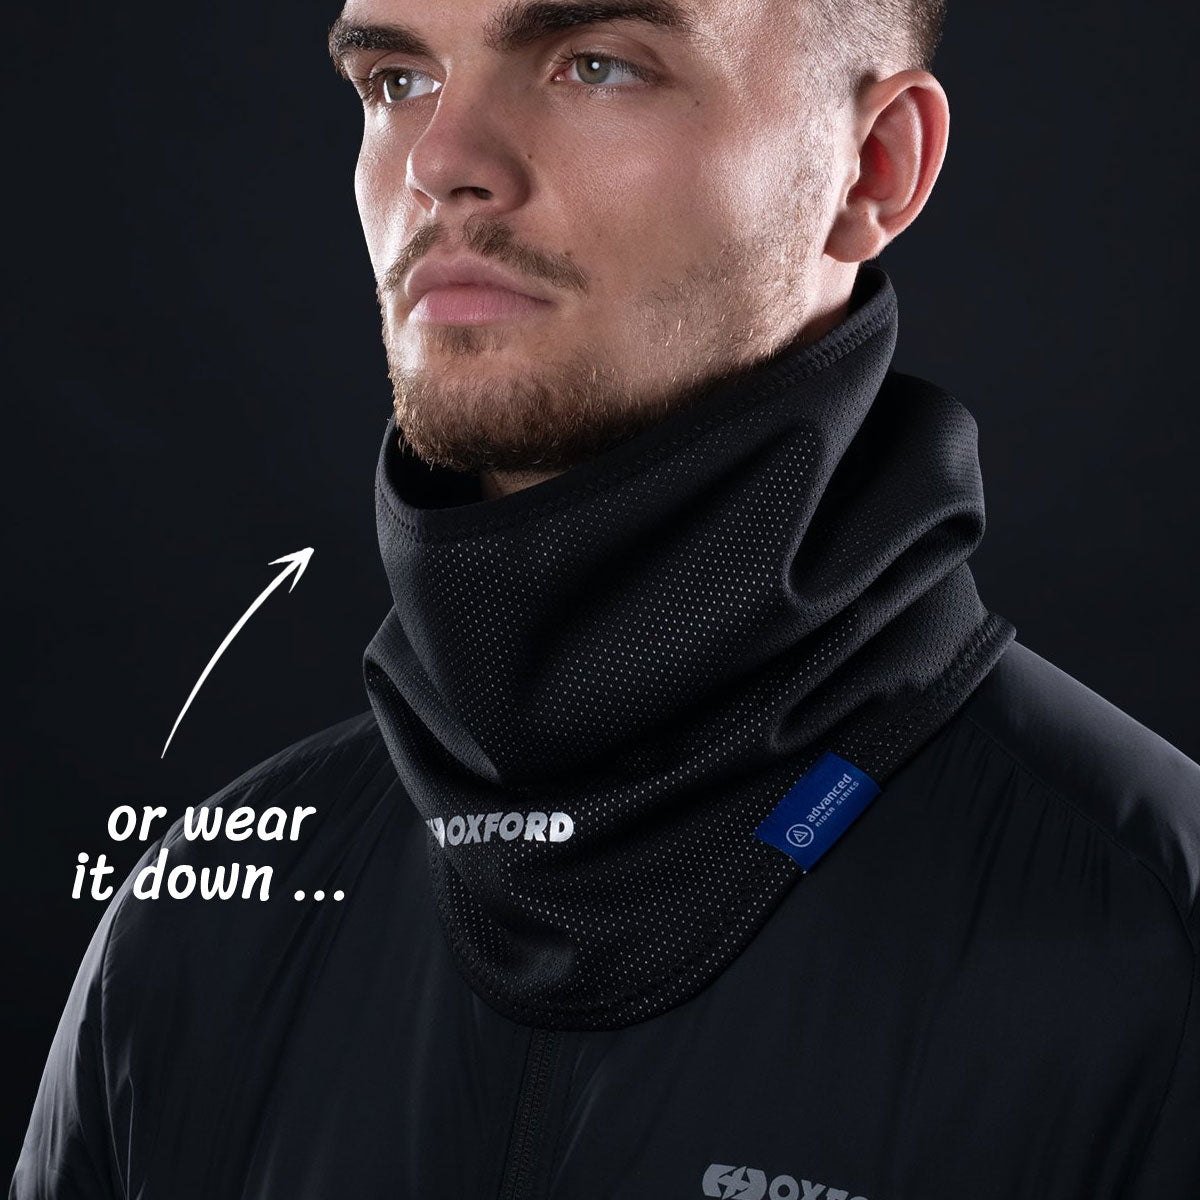 Oxford Advanced Storm Collar: Extreme Weather Protection & Comfort With Oxford's Advanced Layering Garments